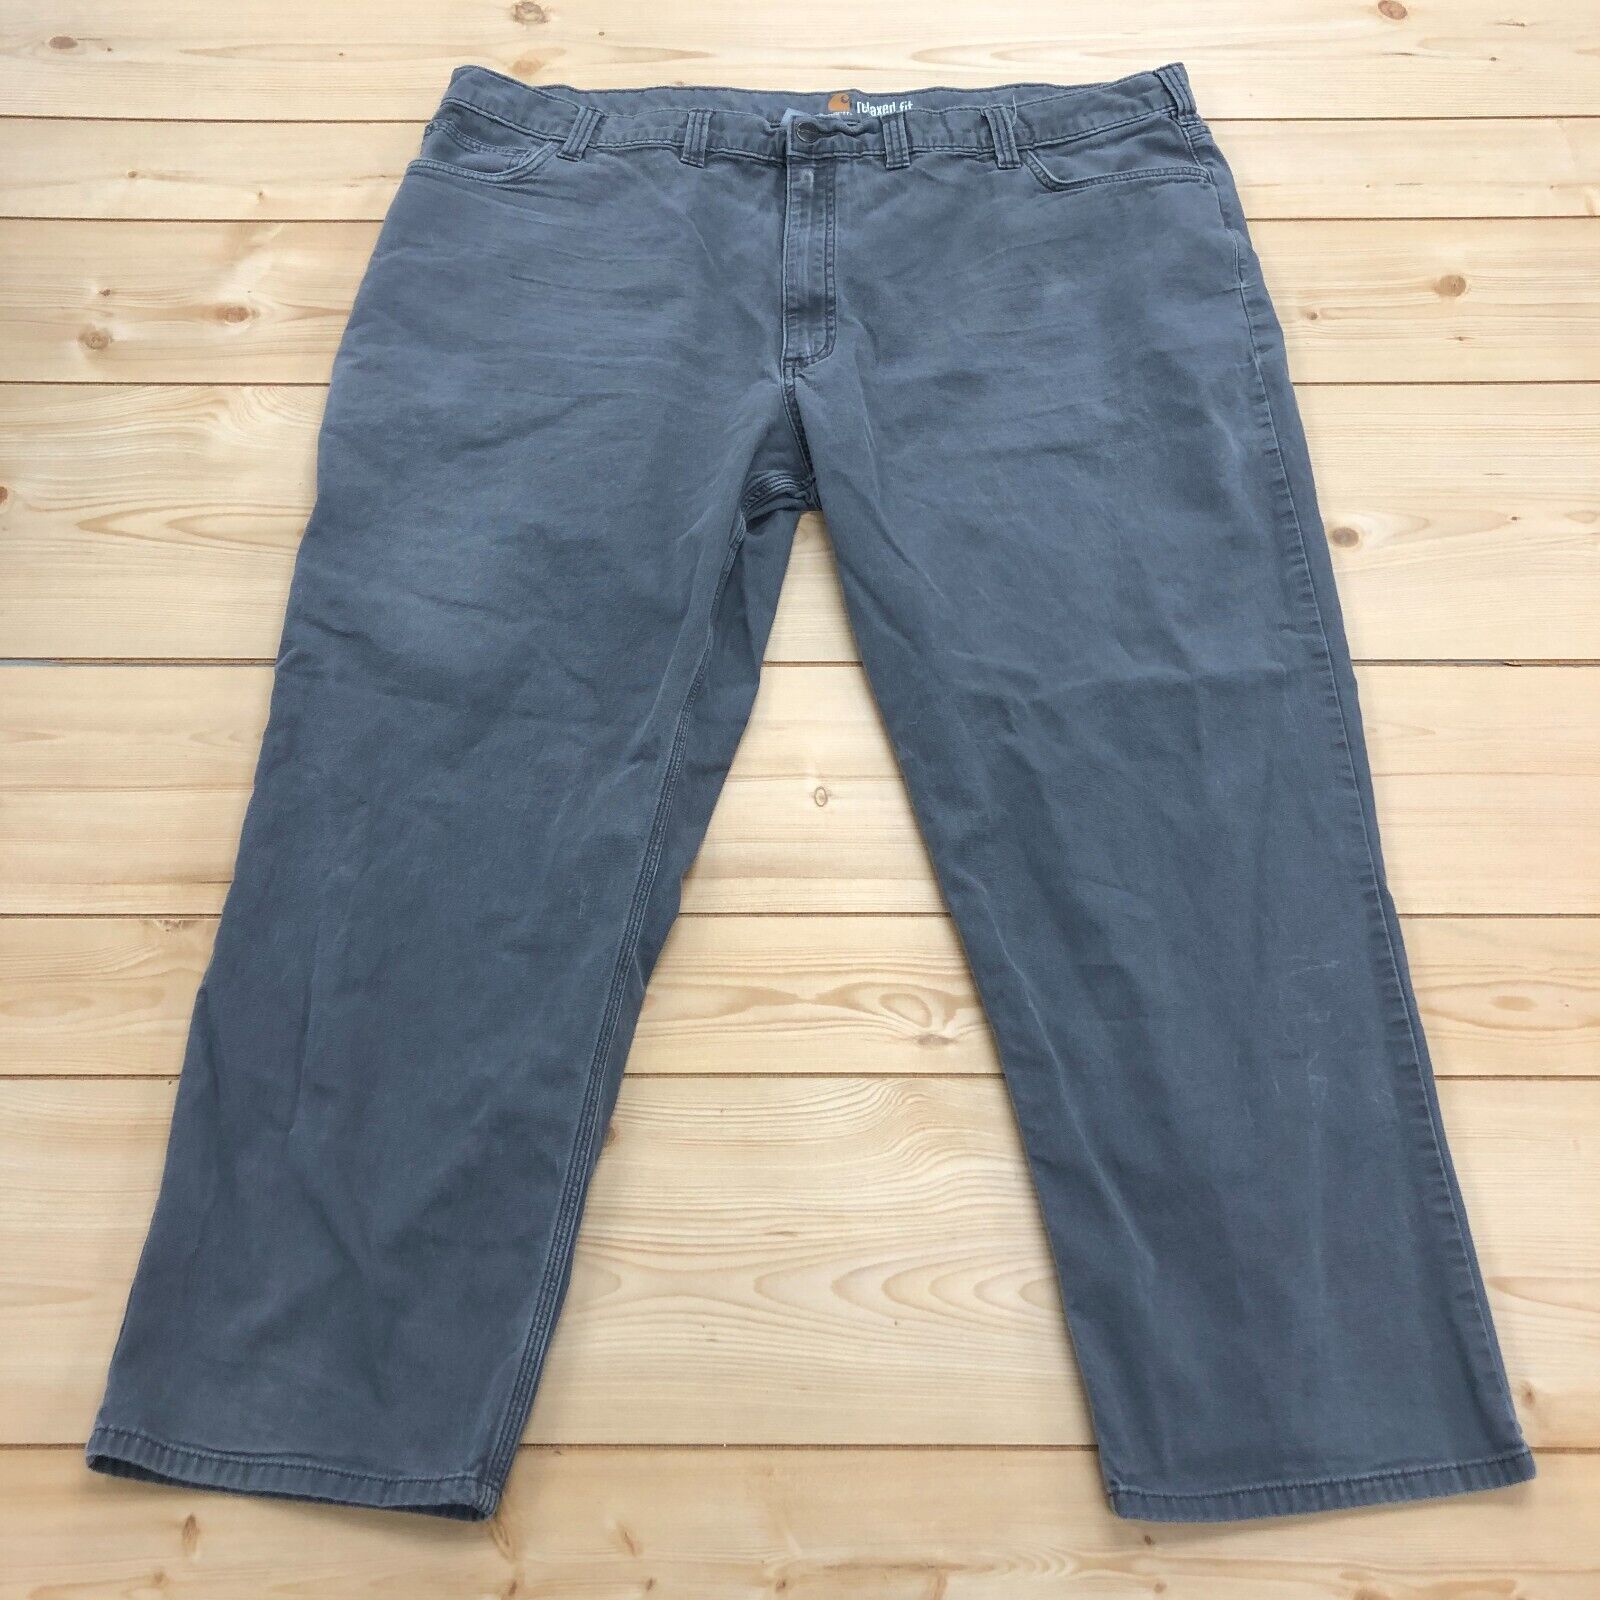 Carhartt Grey Flat Front Relaxed Fit Straight Leg Mid Rise Jeans Men Size 48x30